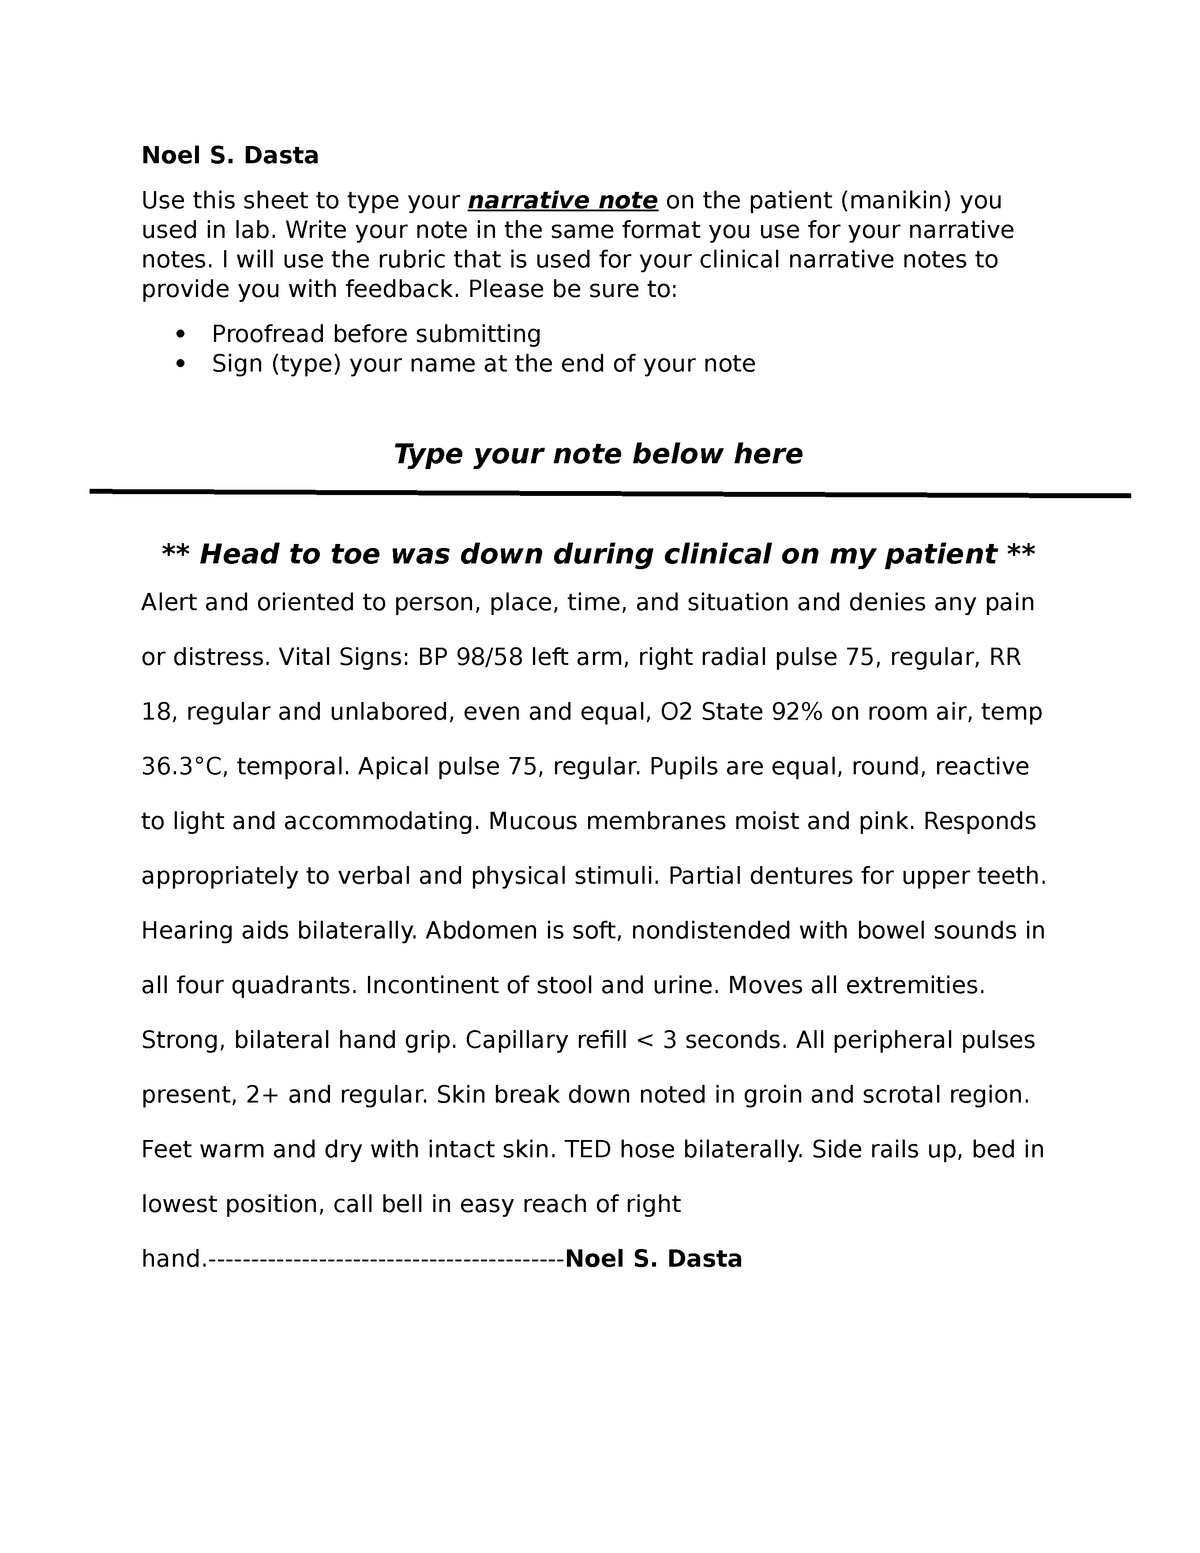 Head to Toe Narrative Note Complete - Noel S. Dasta Use this sheet